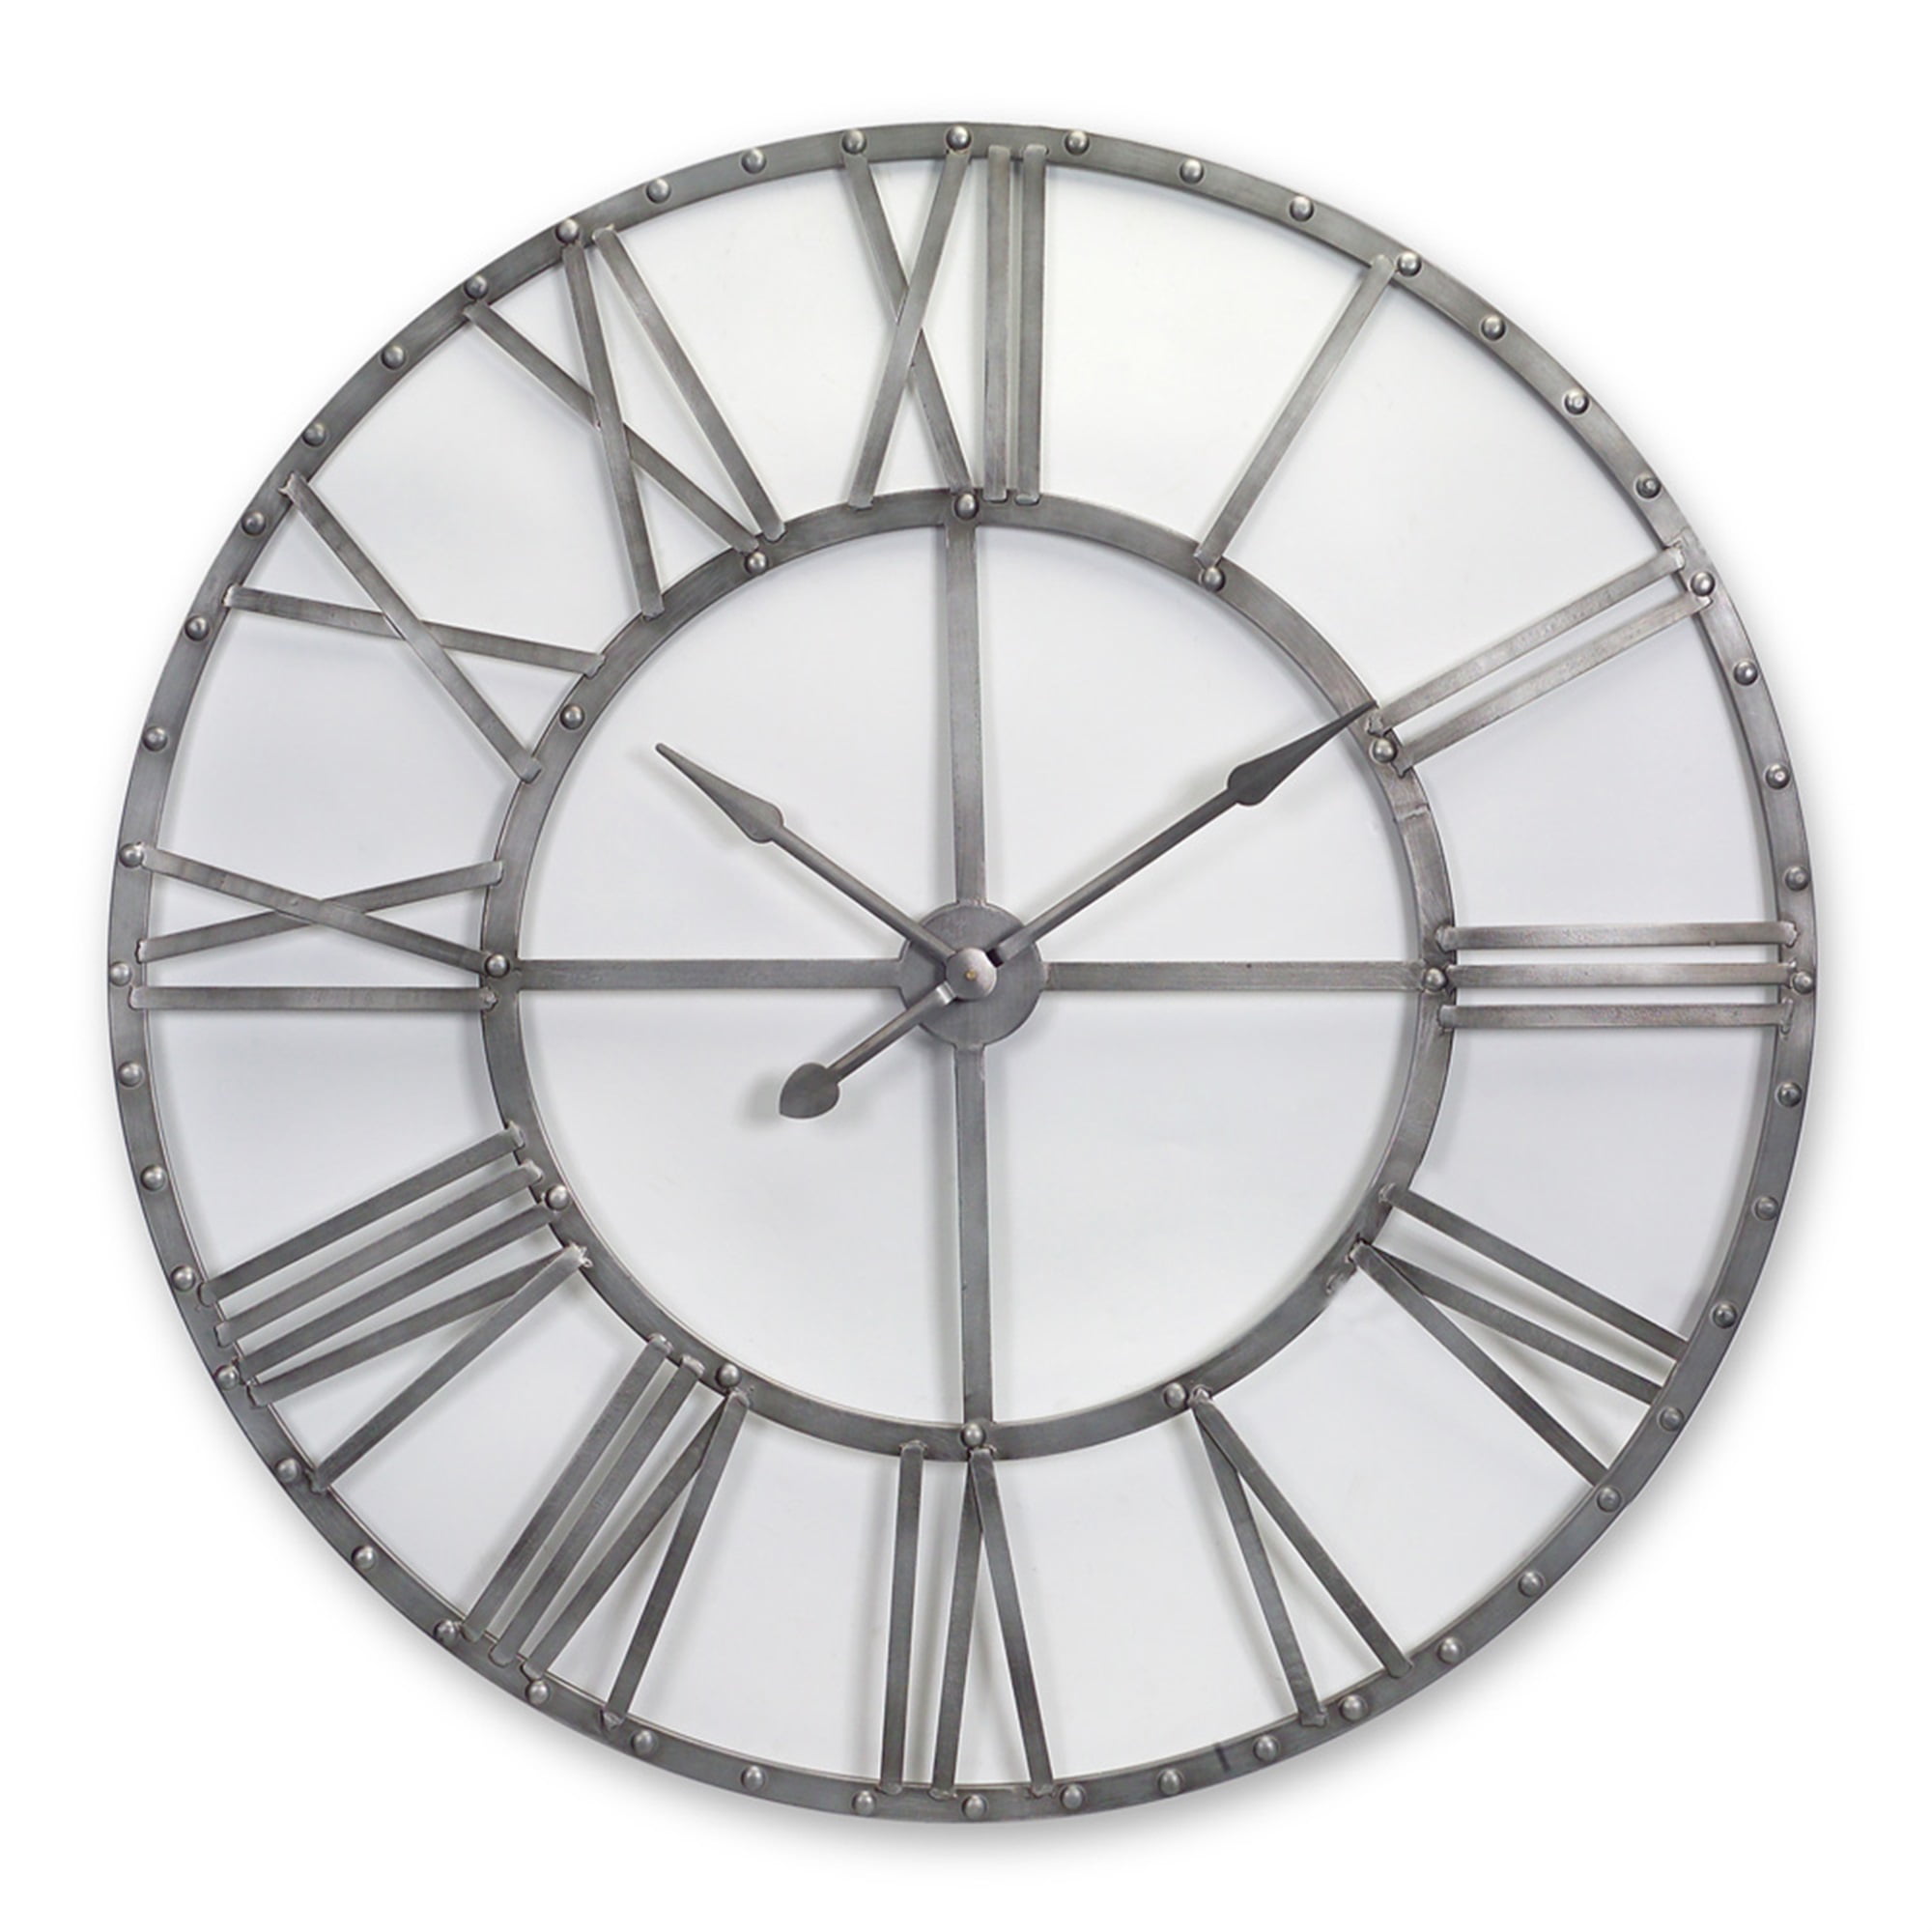 Oversized Metal Wall Clock 46"D Metal (Requires 1 C Battery, Not Inlcuded)